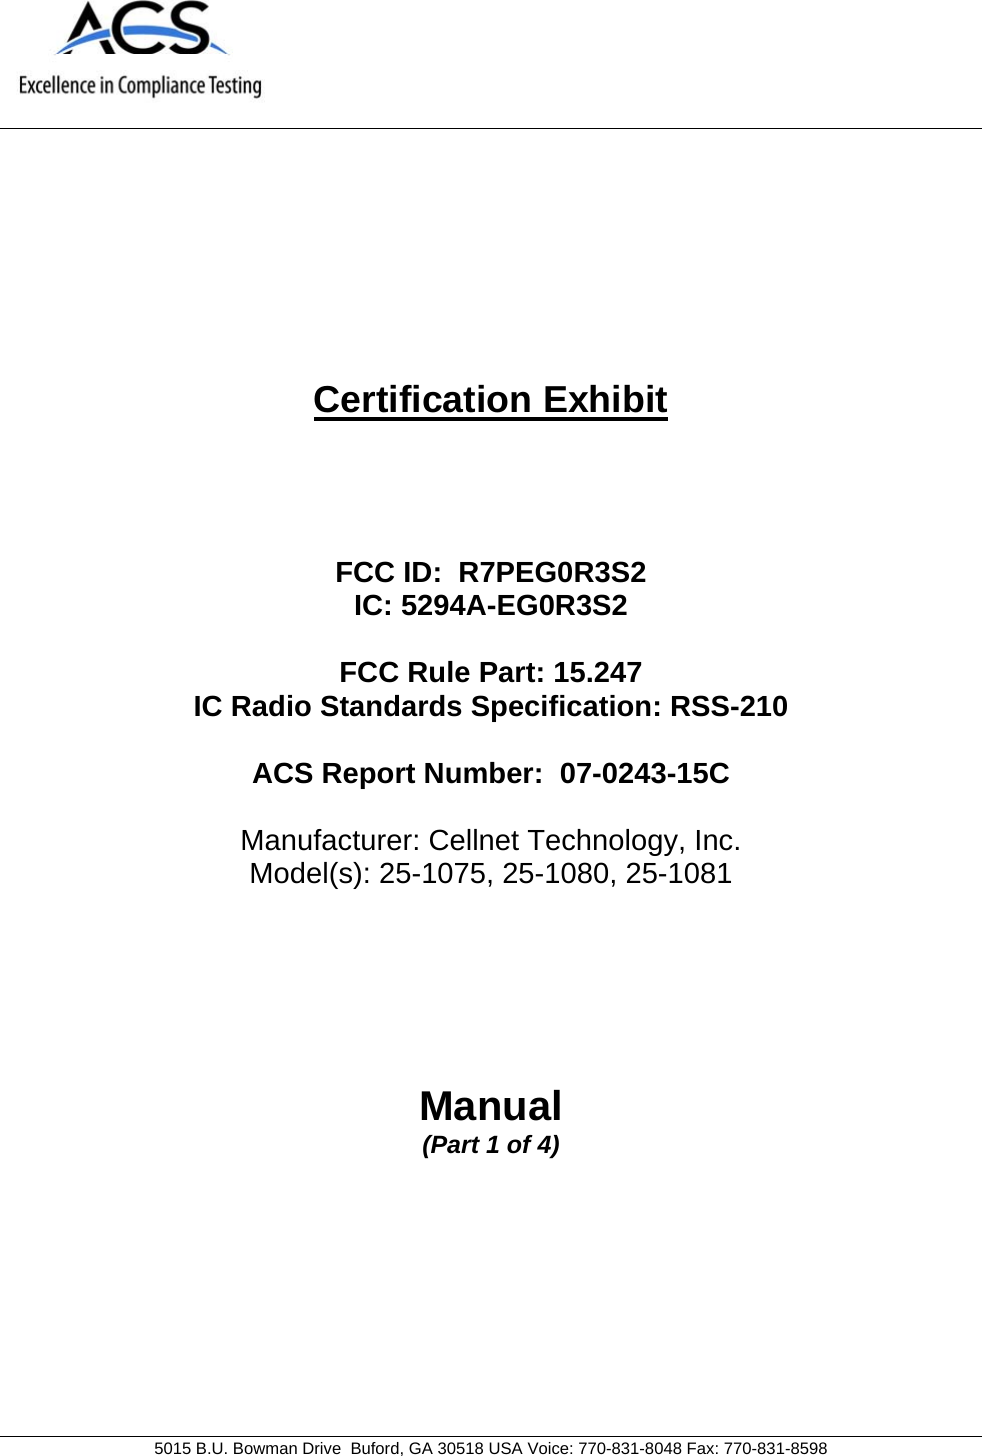     5015 B.U. Bowman Drive  Buford, GA 30518 USA Voice: 770-831-8048 Fax: 770-831-8598   Certification Exhibit     FCC ID:  R7PEG0R3S2 IC: 5294A-EG0R3S2  FCC Rule Part: 15.247 IC Radio Standards Specification: RSS-210  ACS Report Number:  07-0243-15C   Manufacturer: Cellnet Technology, Inc. Model(s): 25-1075, 25-1080, 25-1081     Manual (Part 1 of 4)  